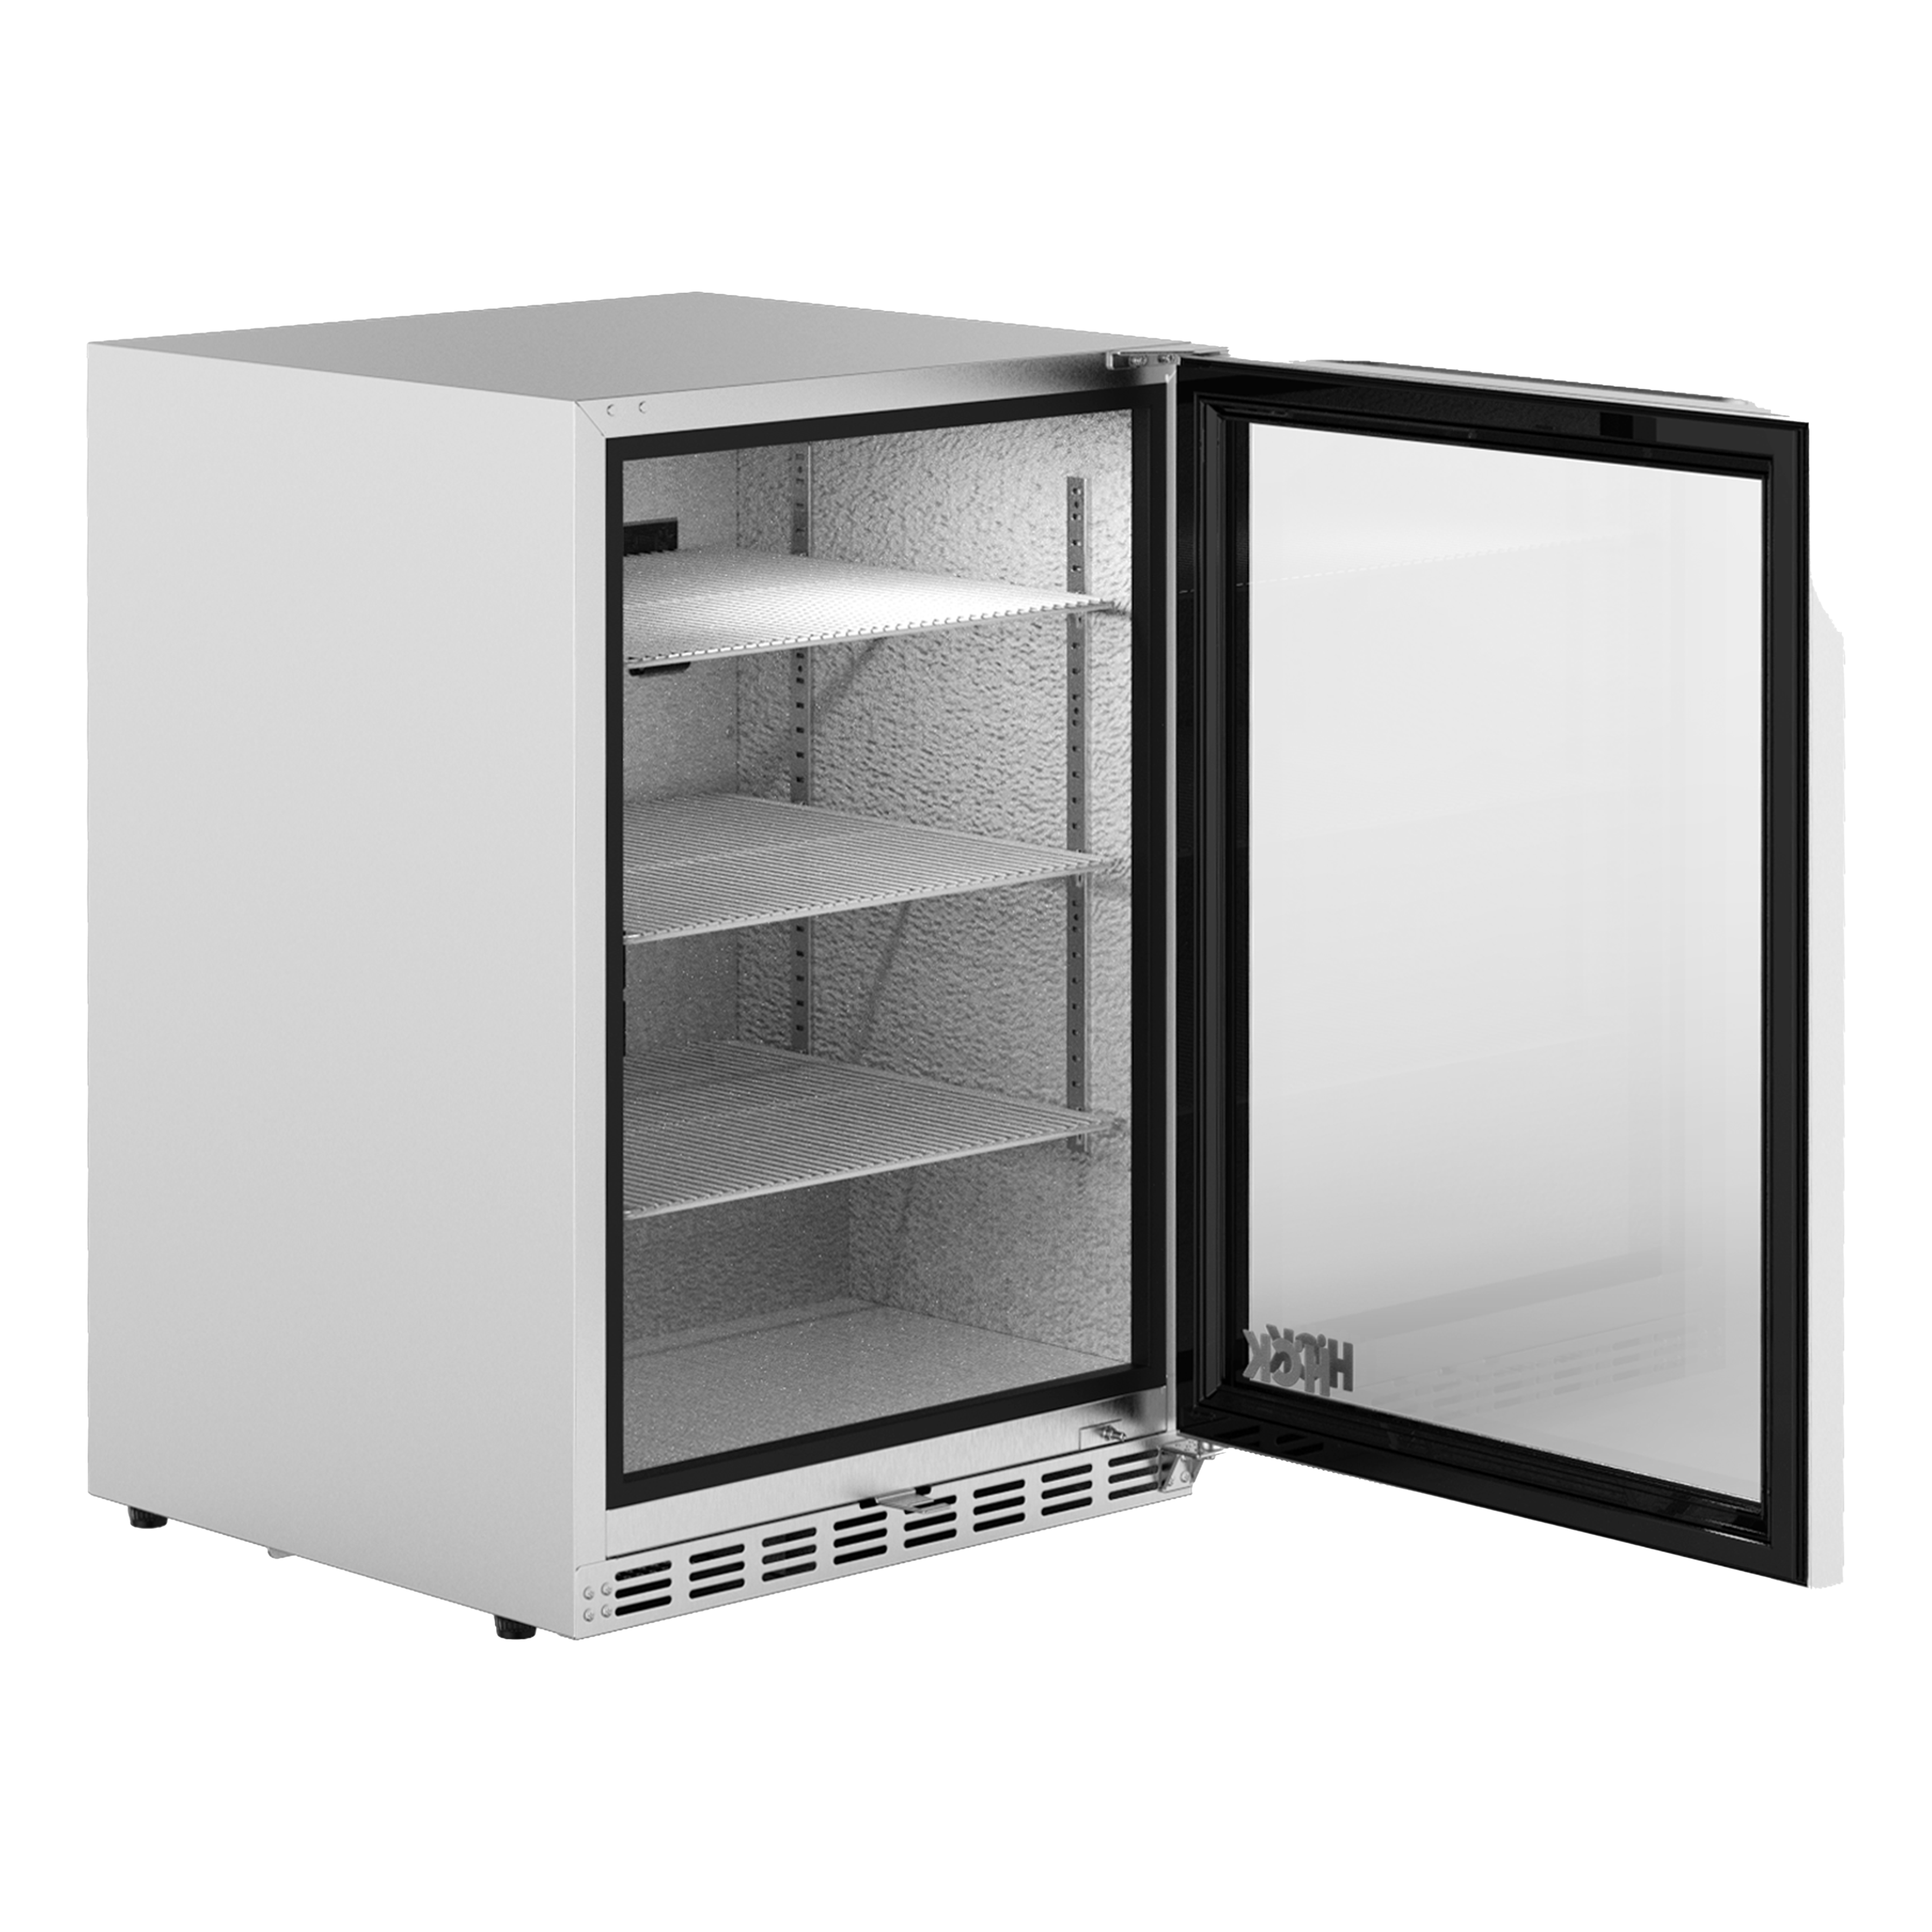 Side view of the 5.12 Cu Ft Beverage Outdoor Refrigerator 132 cans, with the door open revealing its interior space equipped with three wire shelves